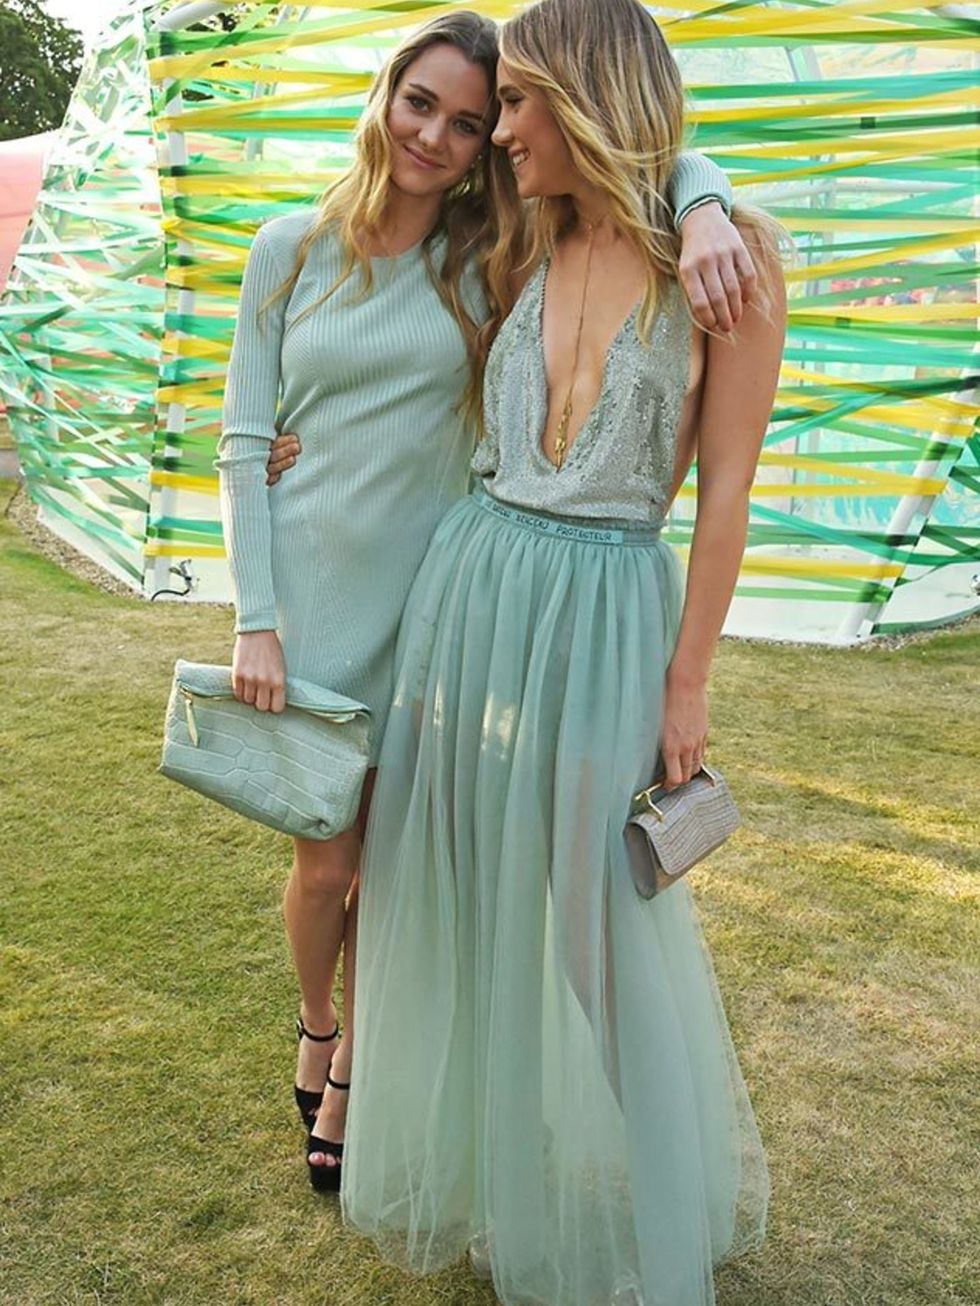 Immy Waterhouse and Suki Waterhouse attend the Serpentine Summer Gallery Party in London, July 2015.